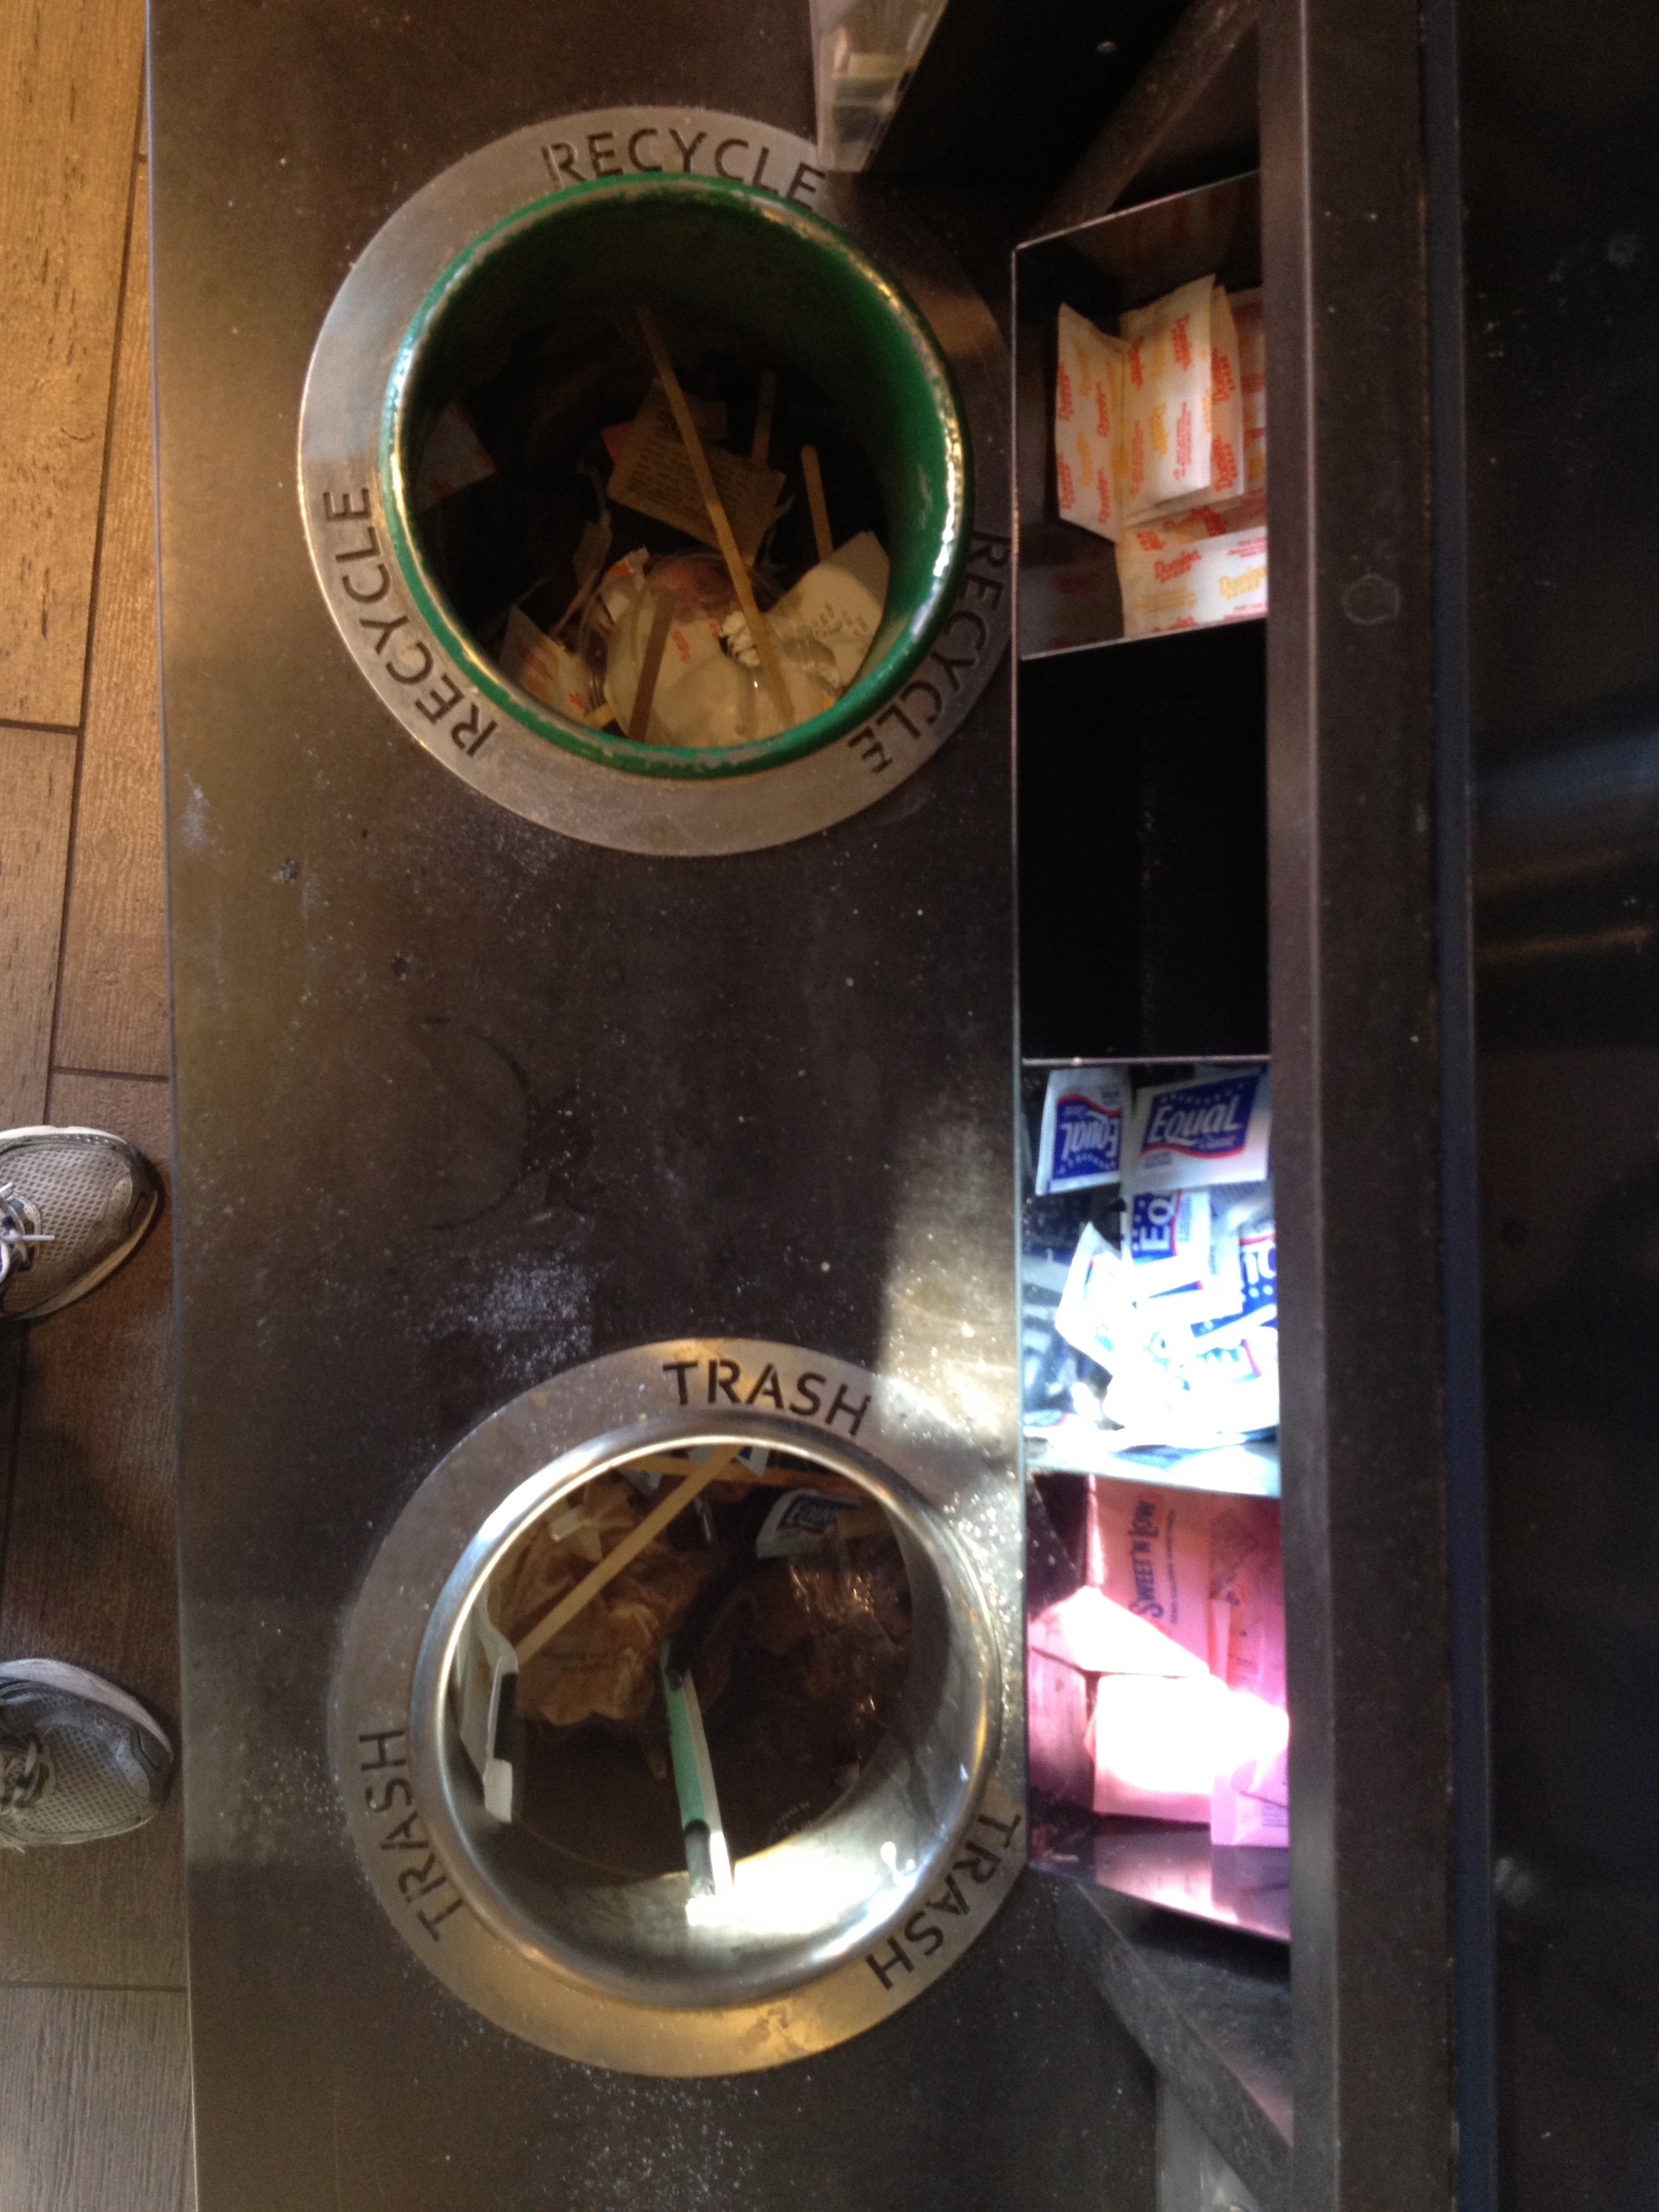 Starbucks would like you to separate your trash from your recycling. Why are you not doing it?